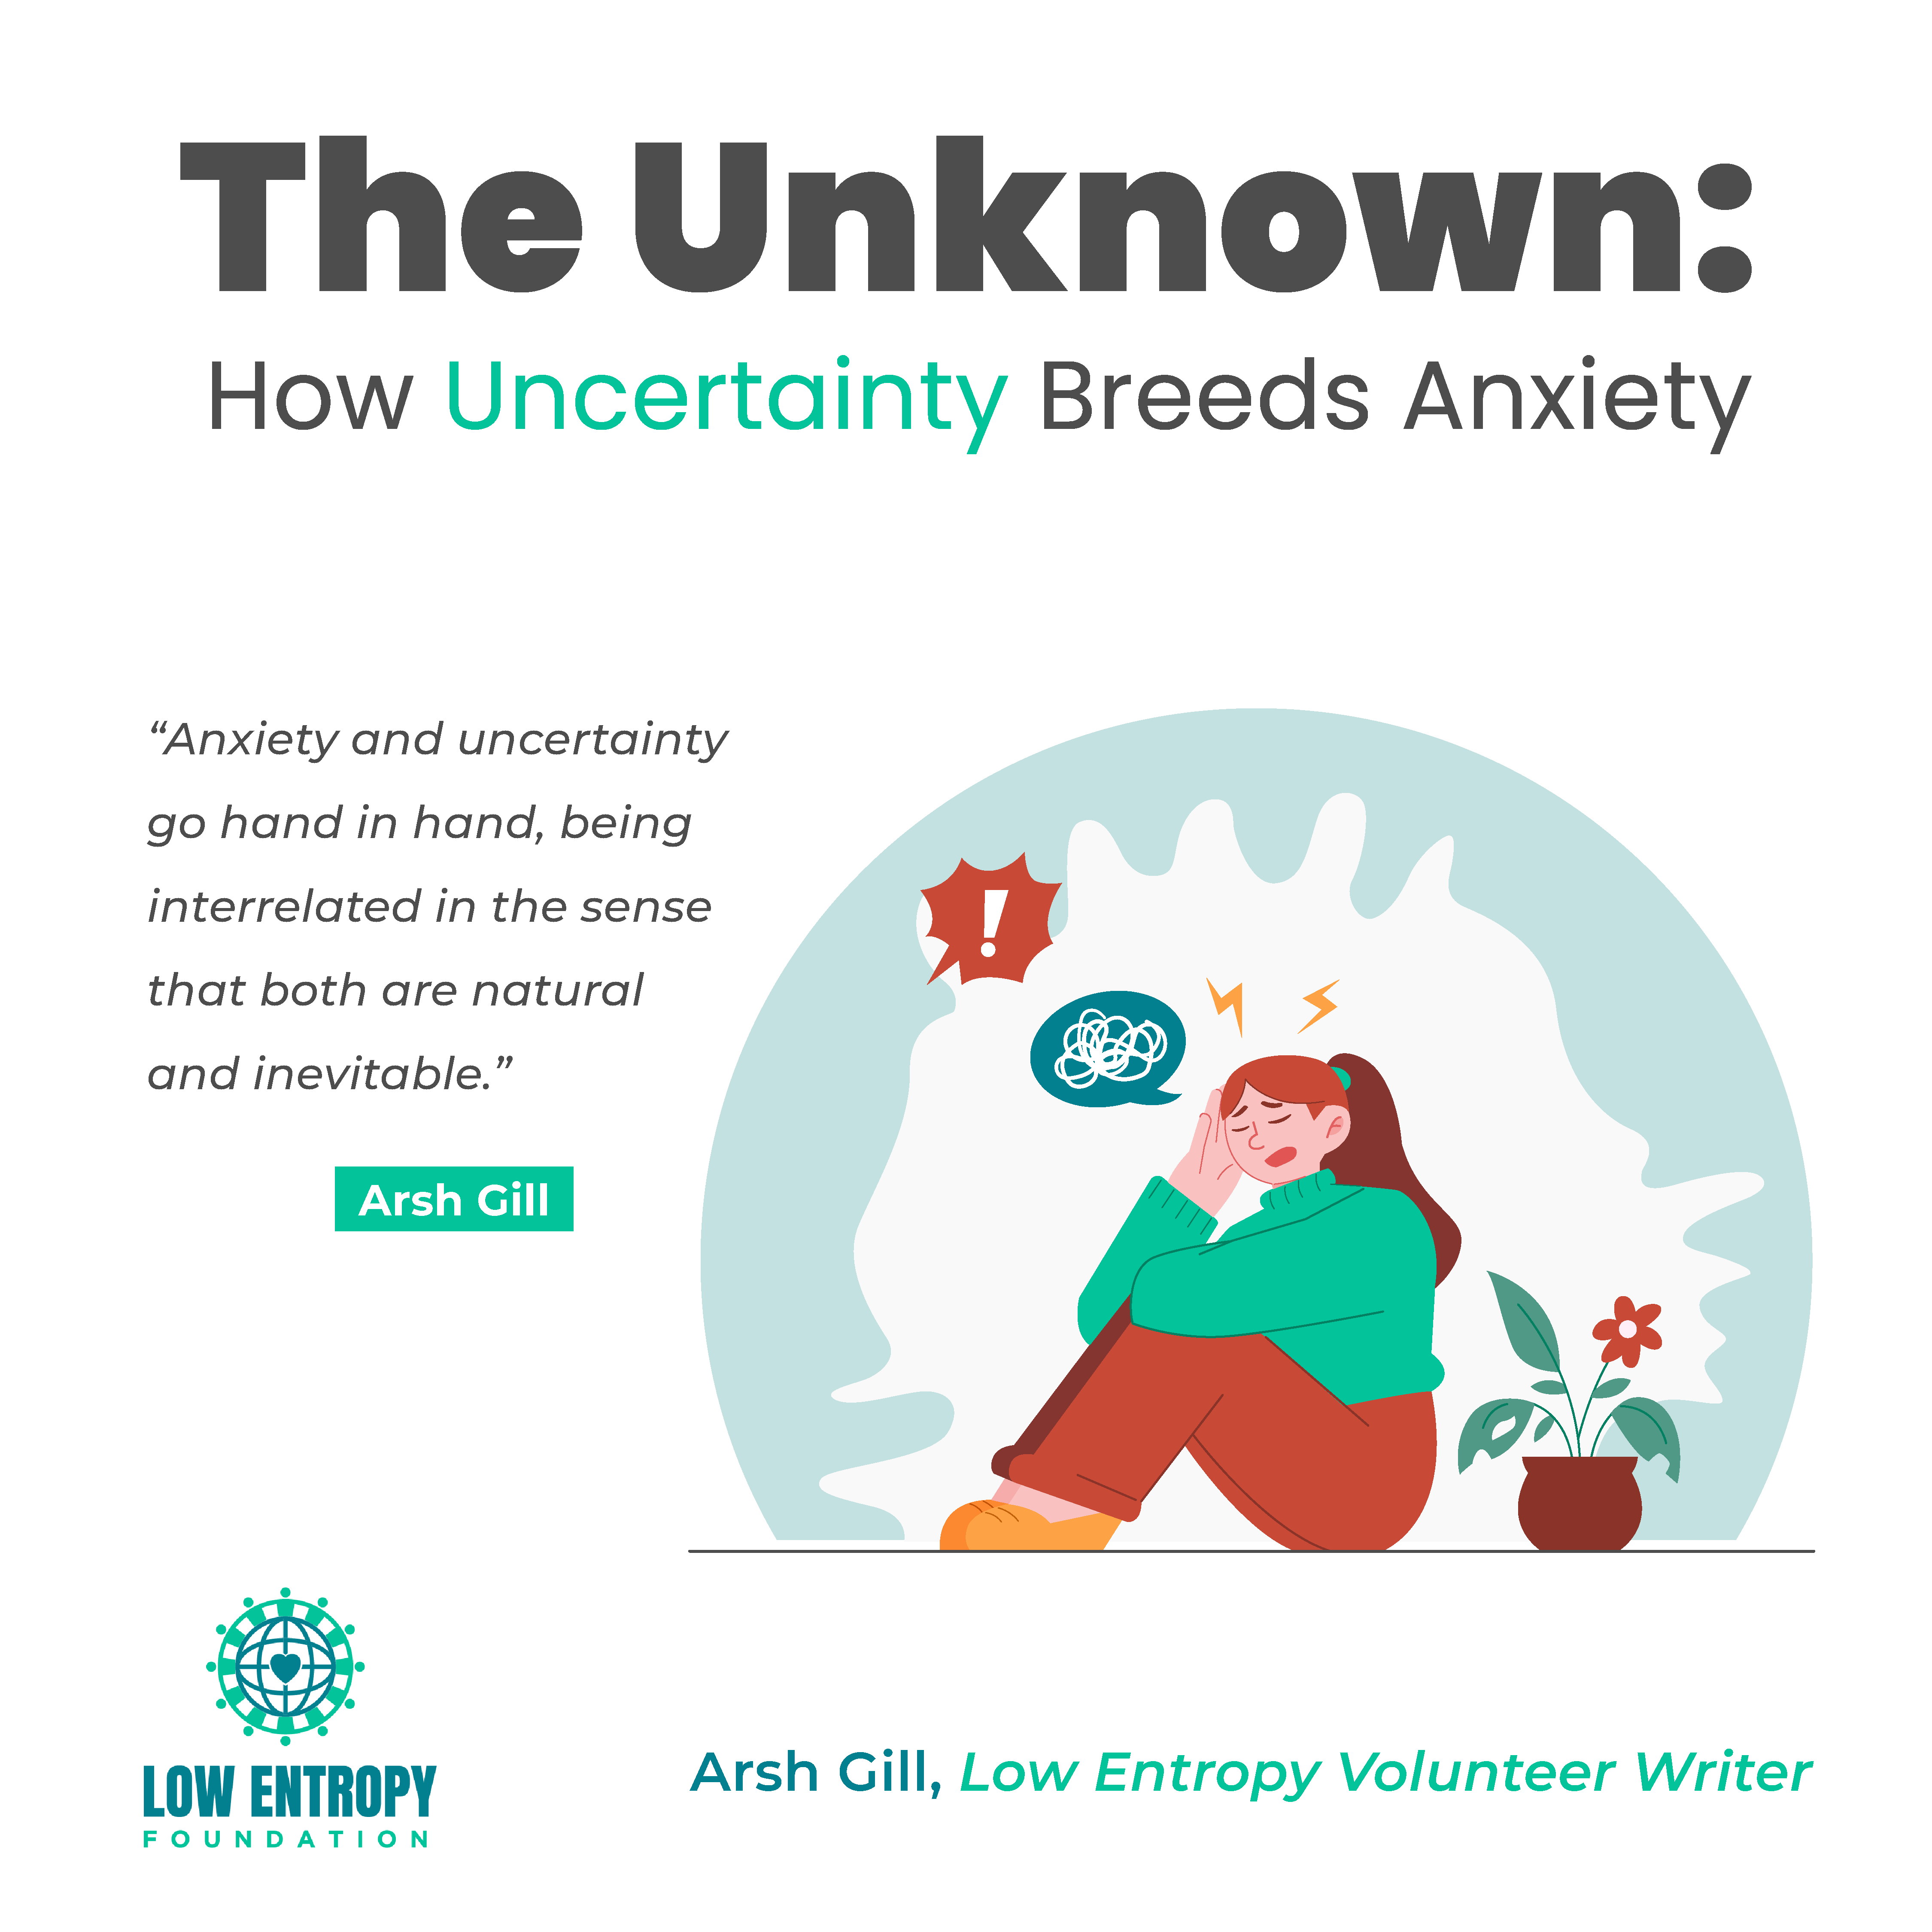 The Unknown: How Uncertainty Breeds Anxiety.